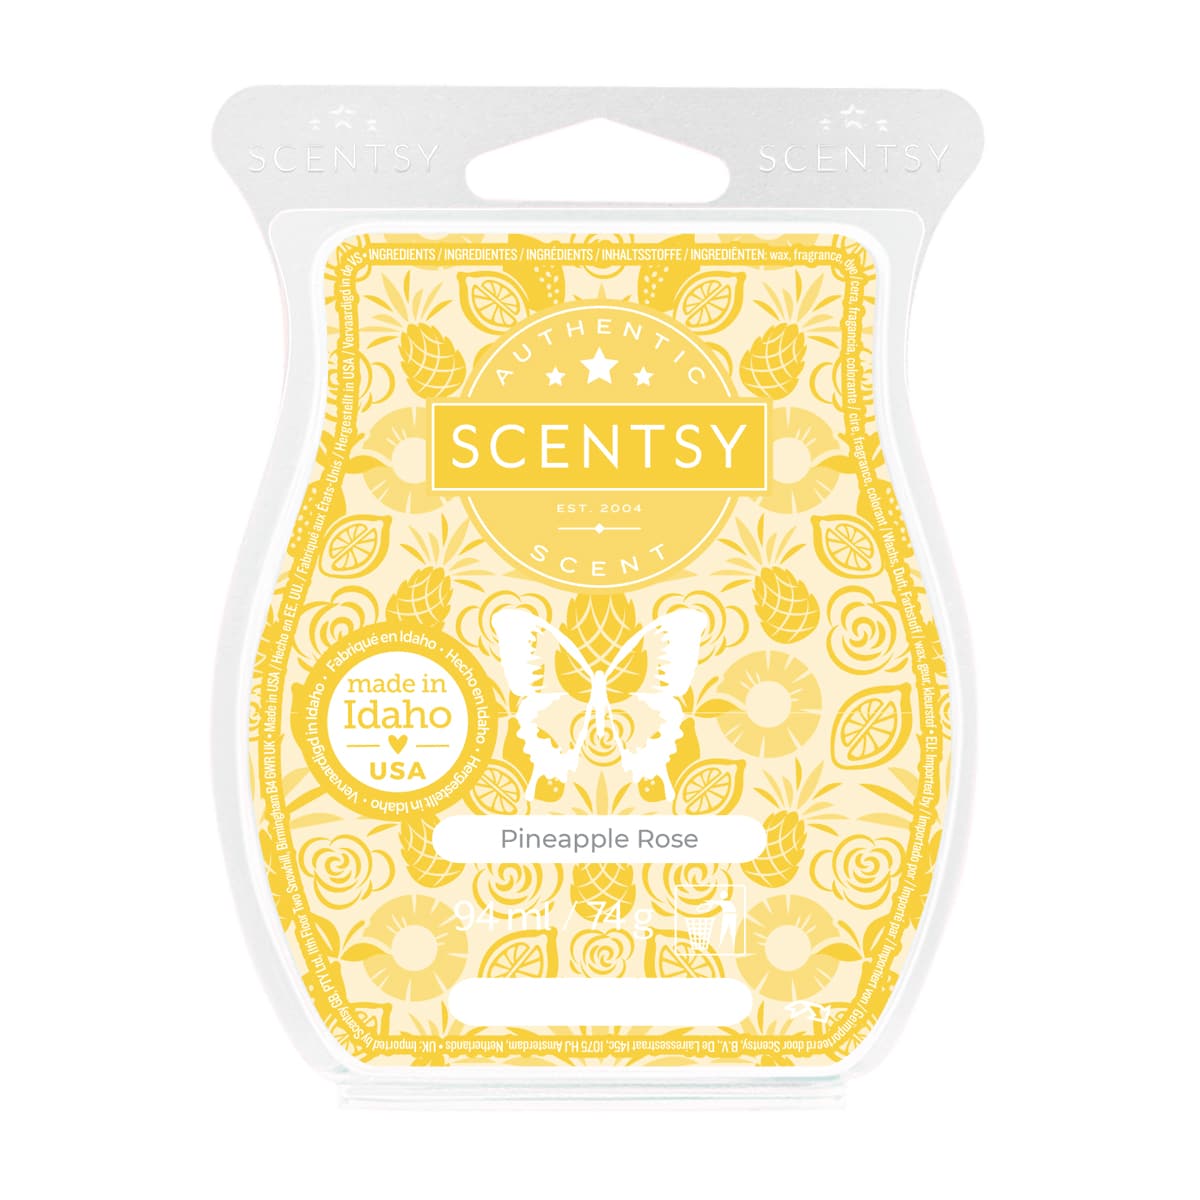 Pineapple Rose Scentsy Wax Wax Melt - Scentsy Warming Candles